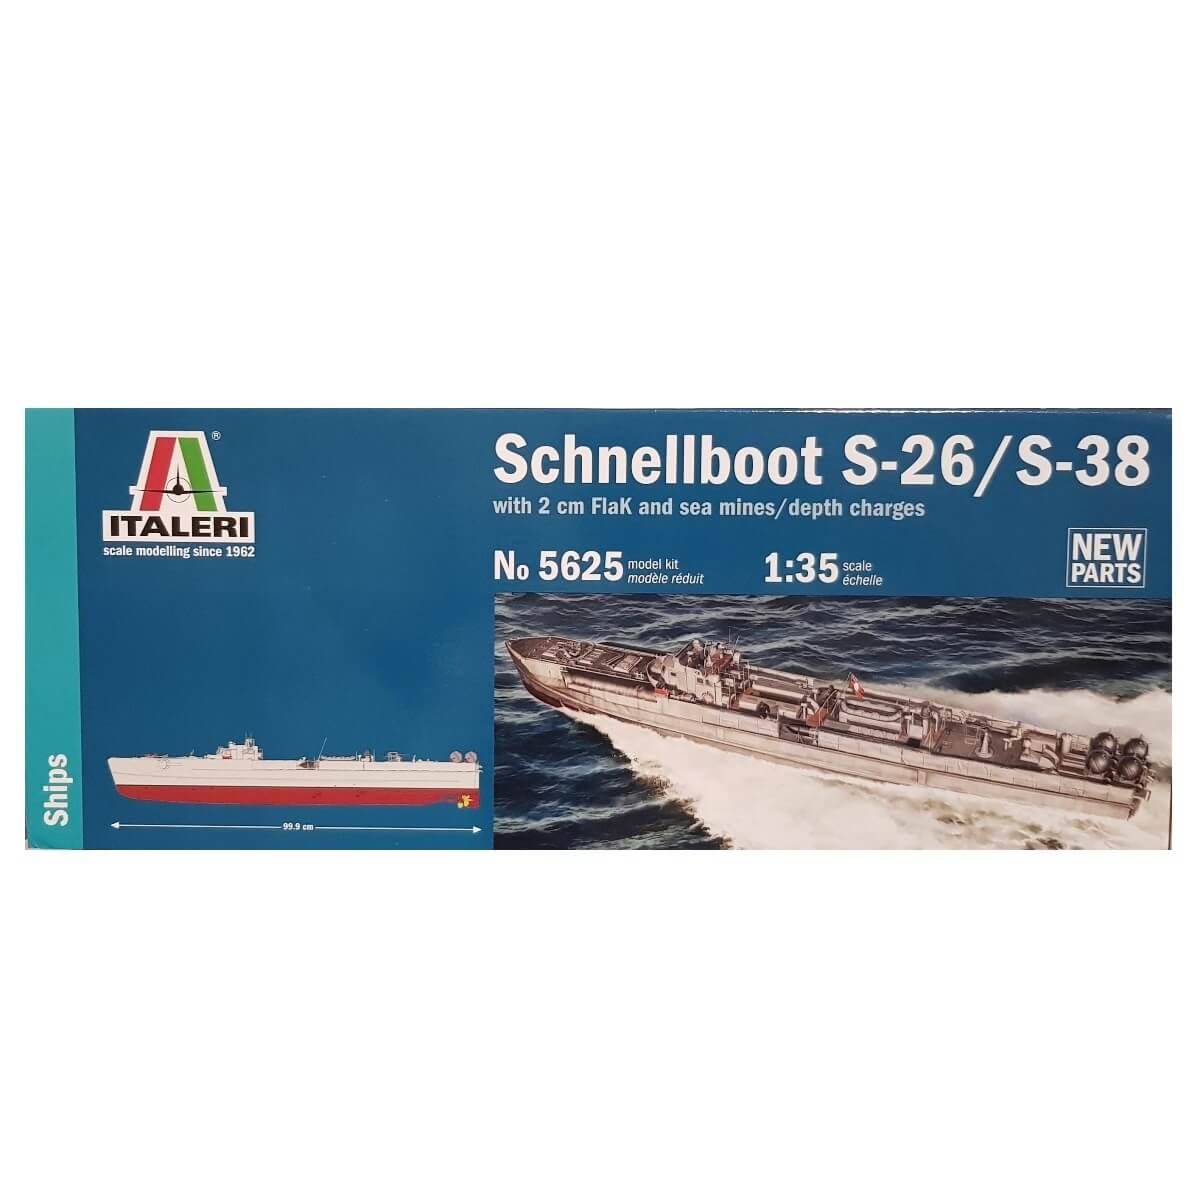 1:35 Schnellboot S-26 / S-38 with 2cm Flak and mines/depth charges - ITALERI